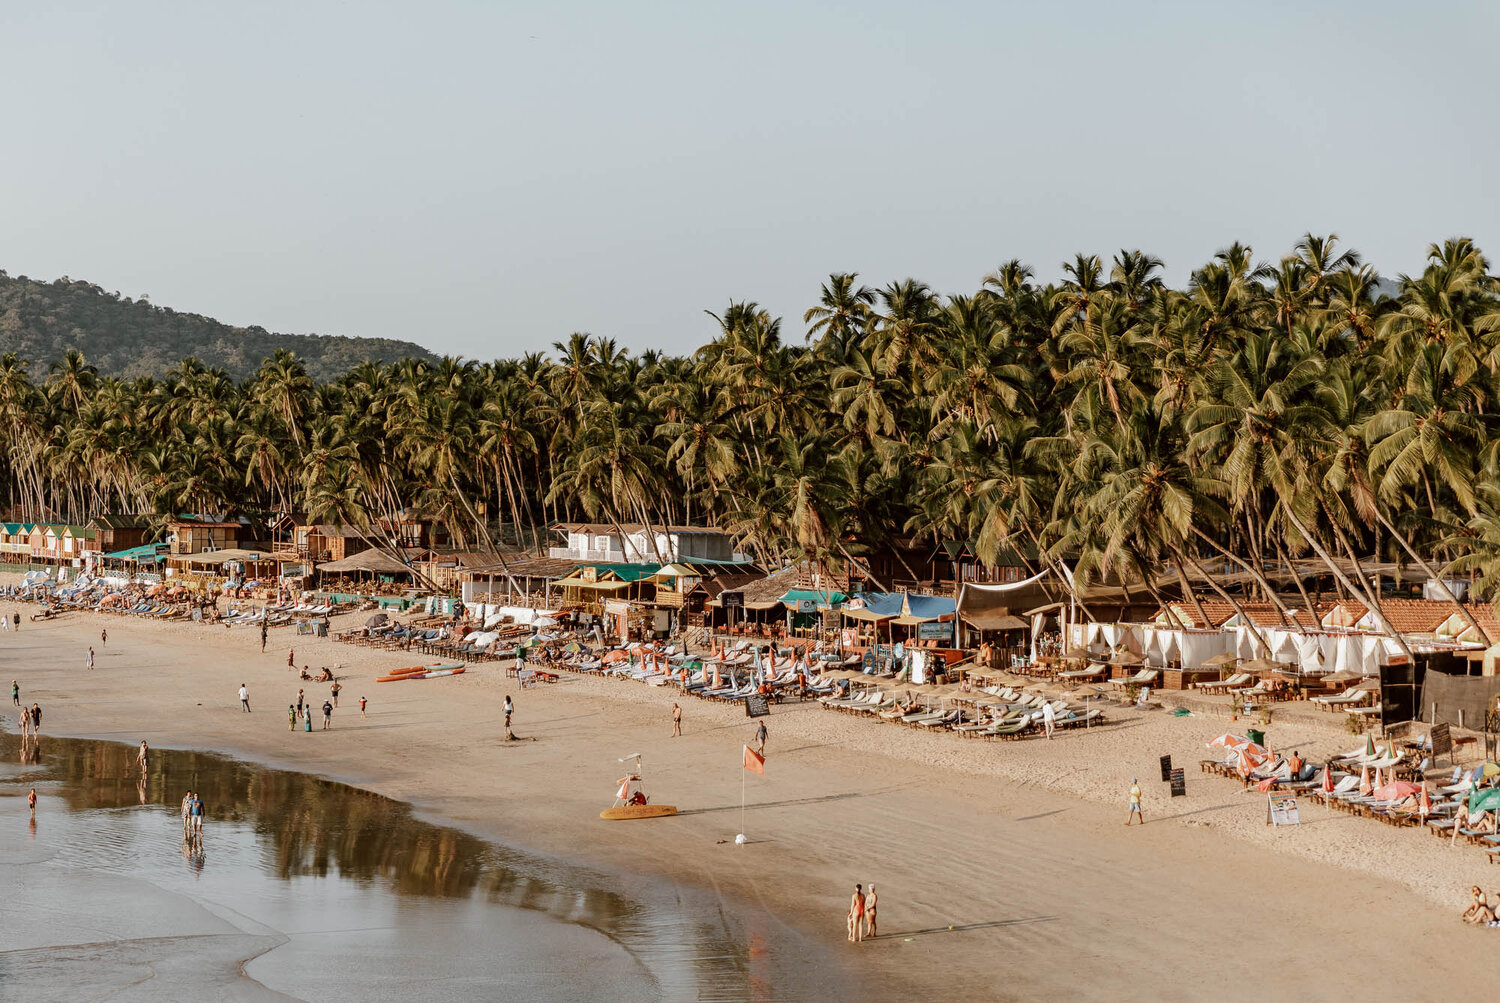 Either way, Palolem beach in south Goa is a great place for laid-back beach...